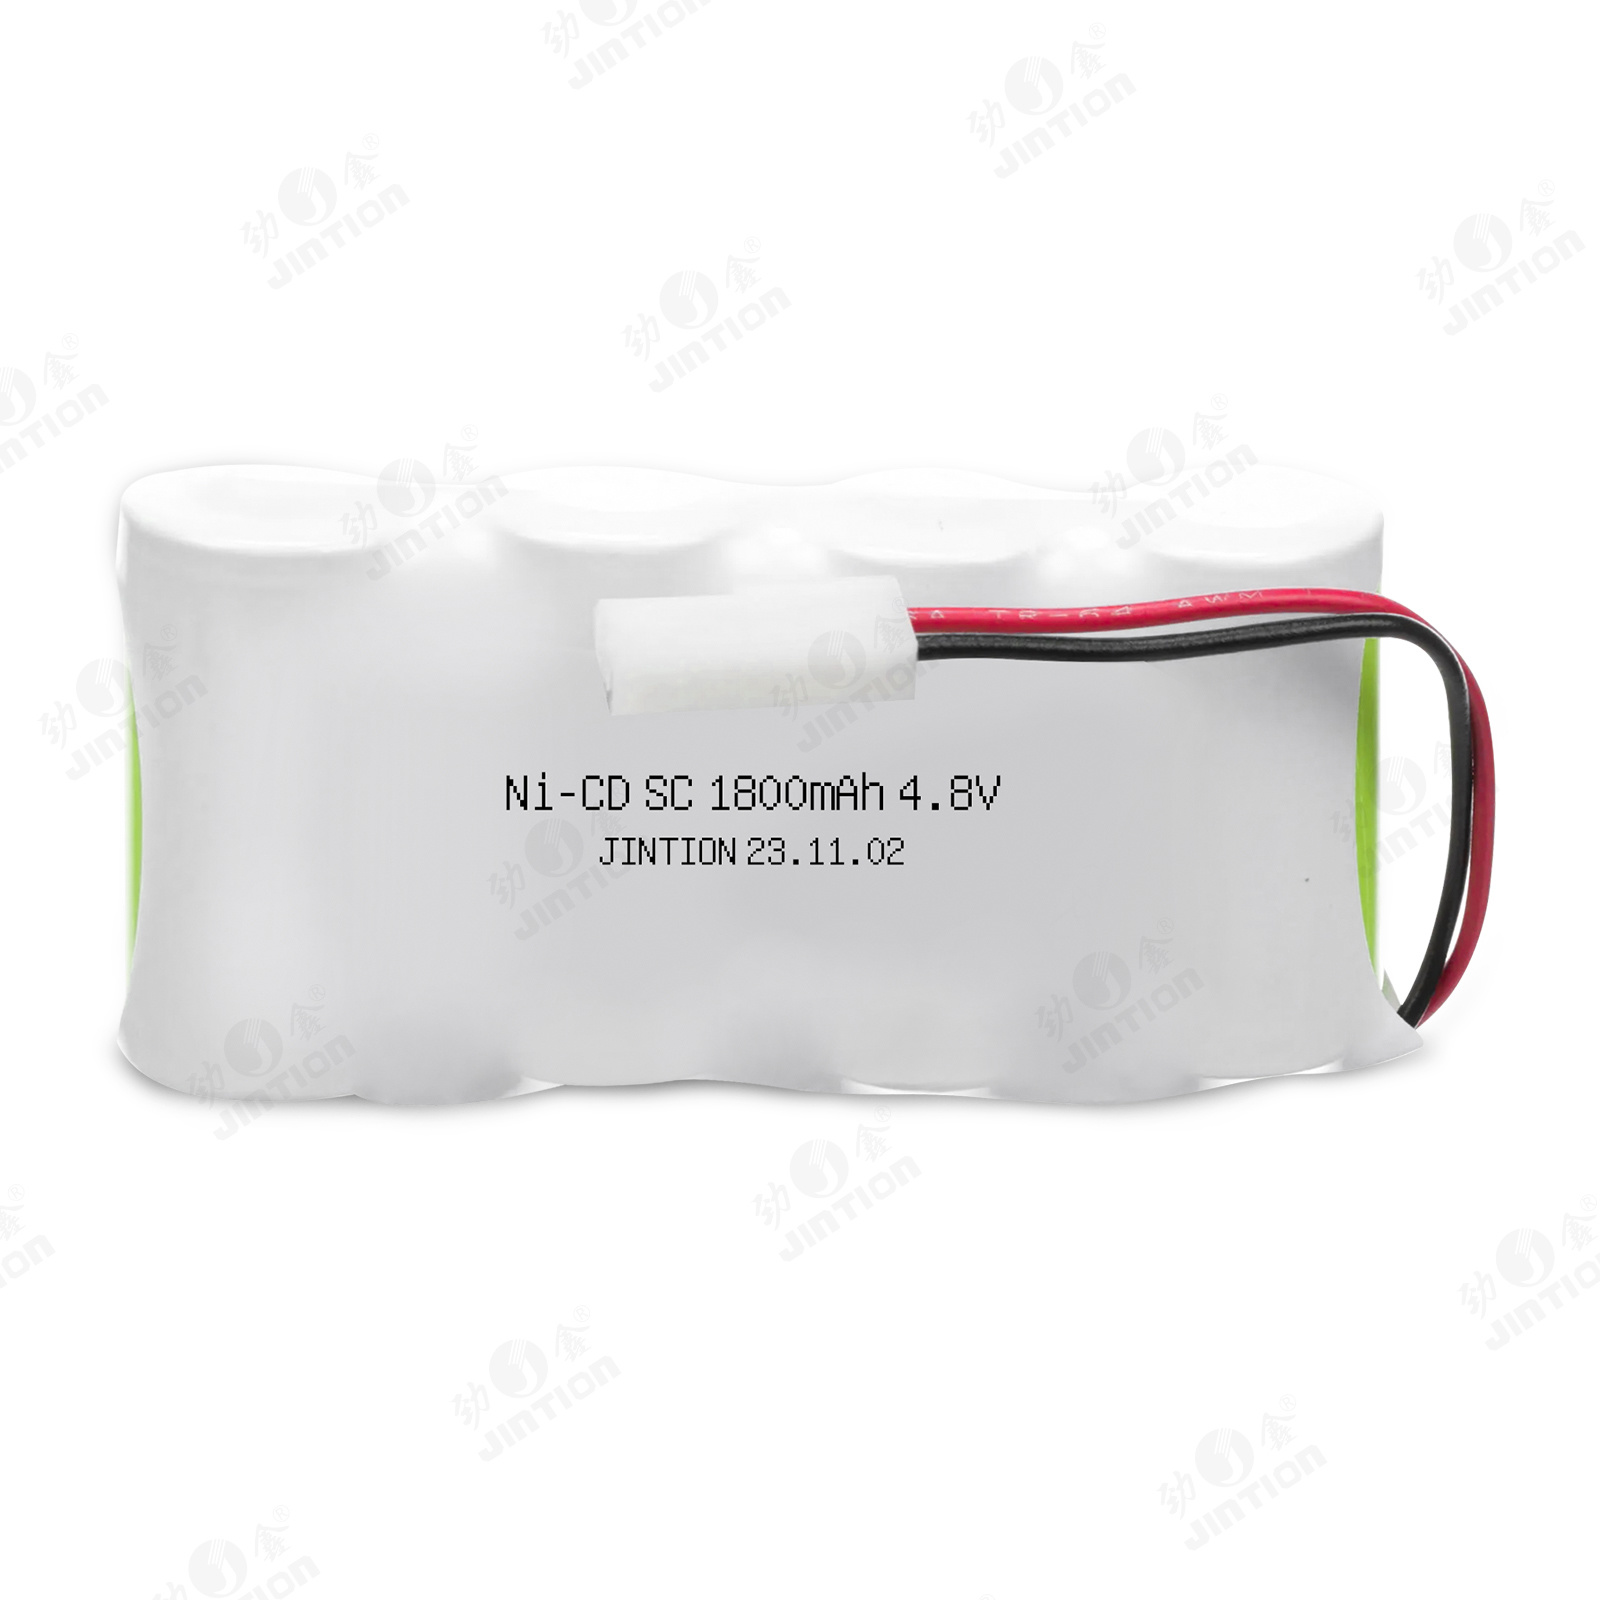 High temperature rechargeable NiCd Sub C battery ni-cd 4.8v 1800mah 4SC 4.8V 1800mAh battery pack for Welch Allyn devices.